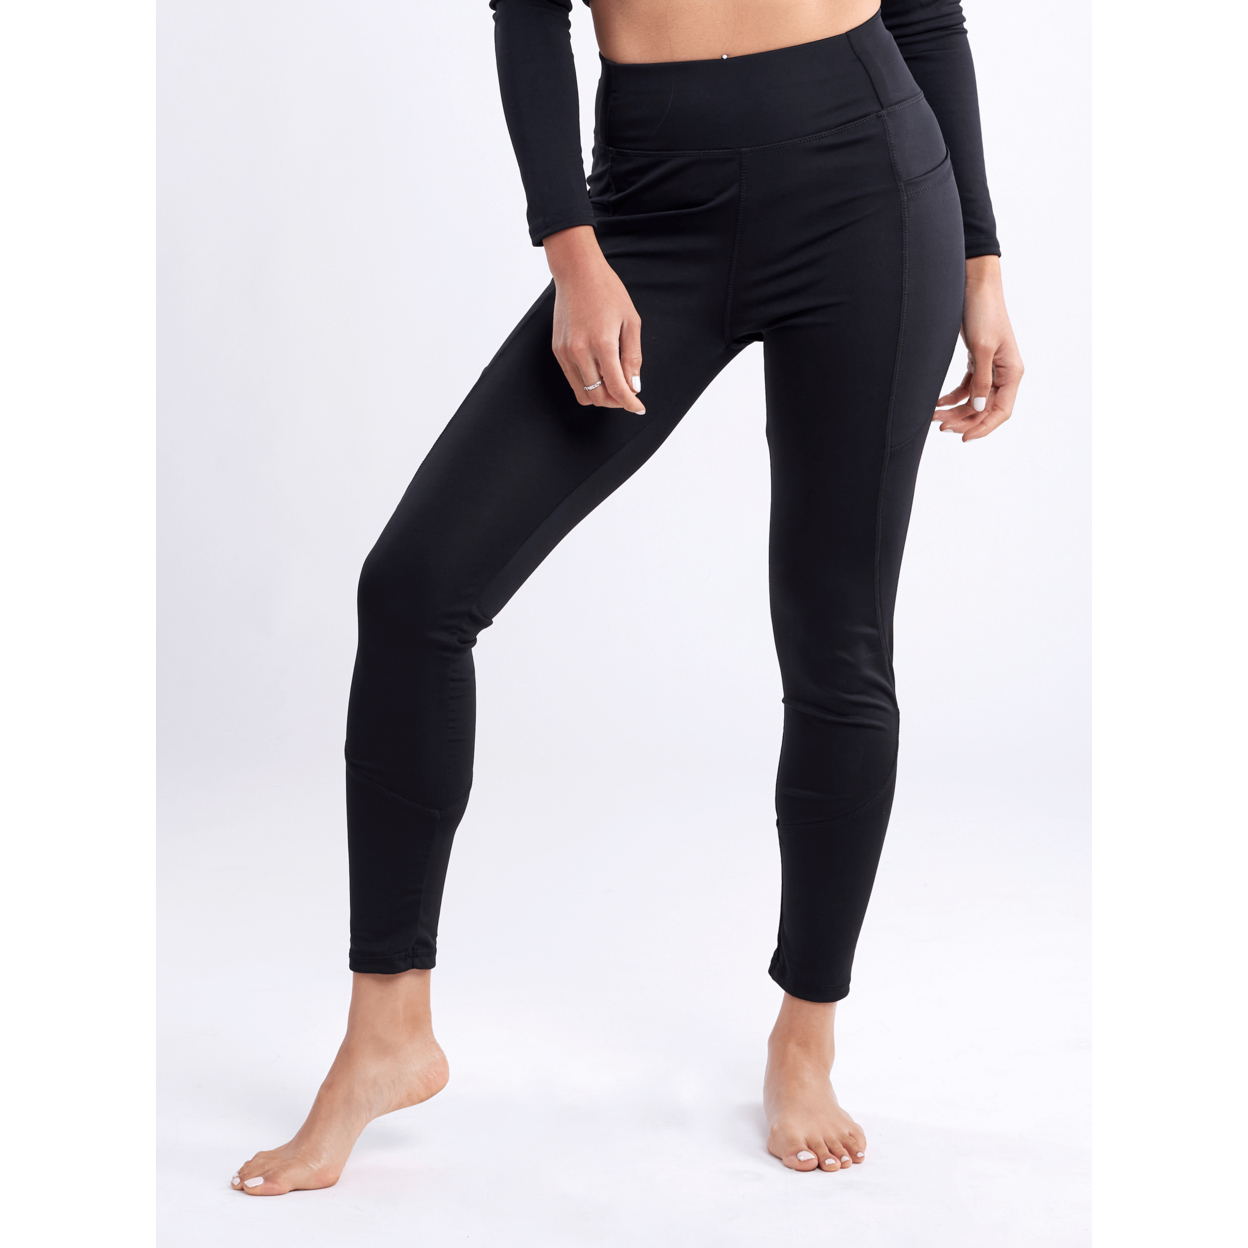 High-Waisted Classic Gym Leggings With Side Pockets - Black, Small / Medium